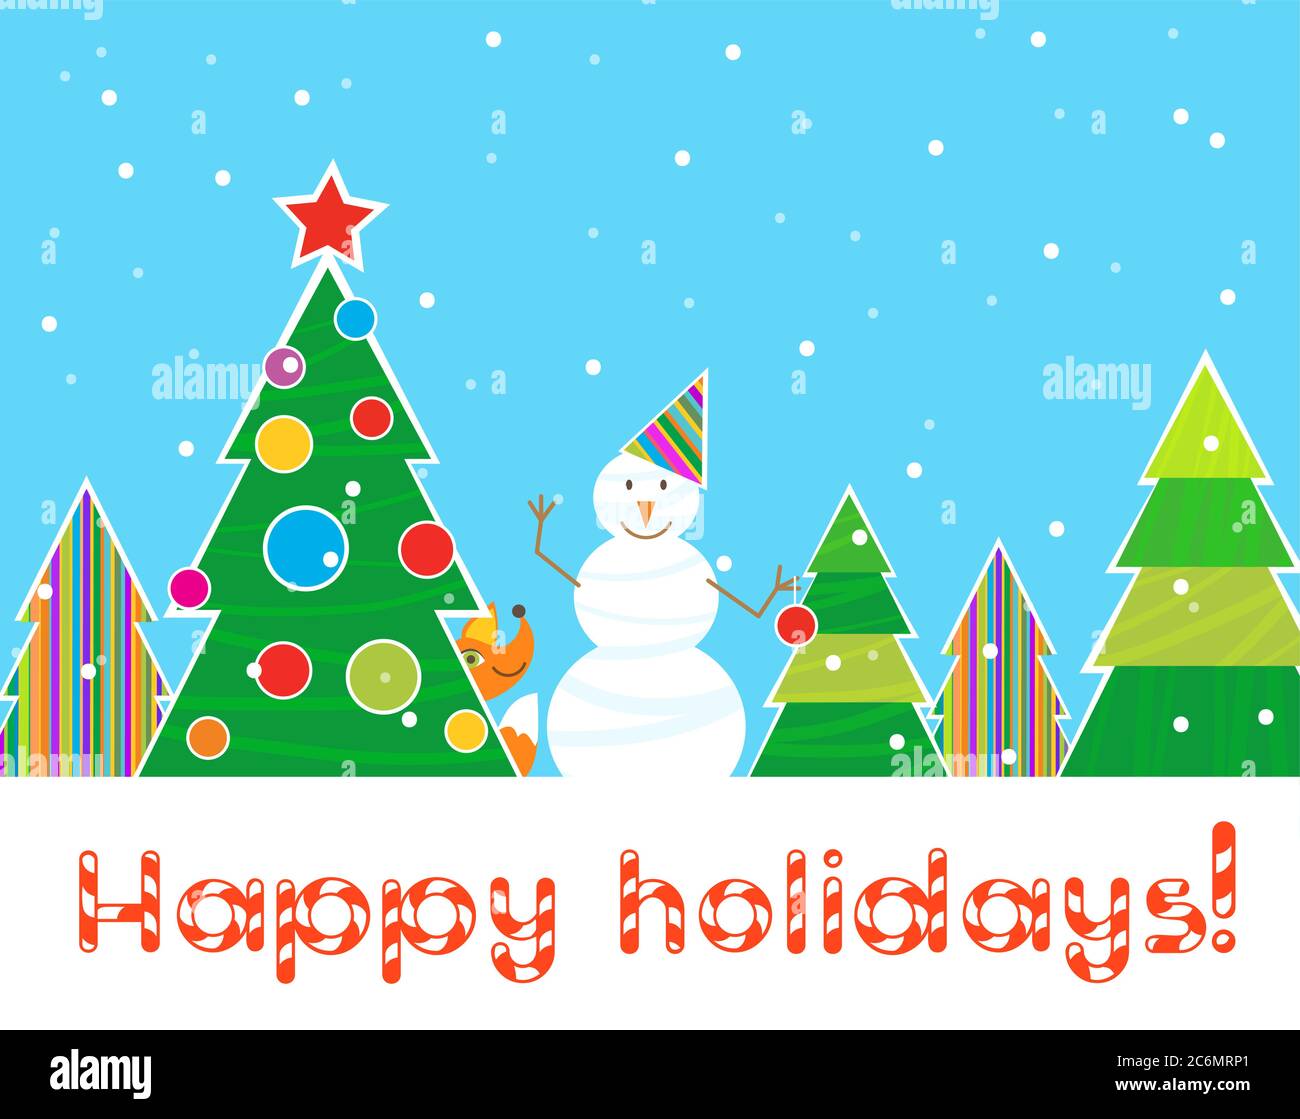 Greeting Christmas card, snowman in the forest with color patterns christmas trees. Happy holidays Stock Vector